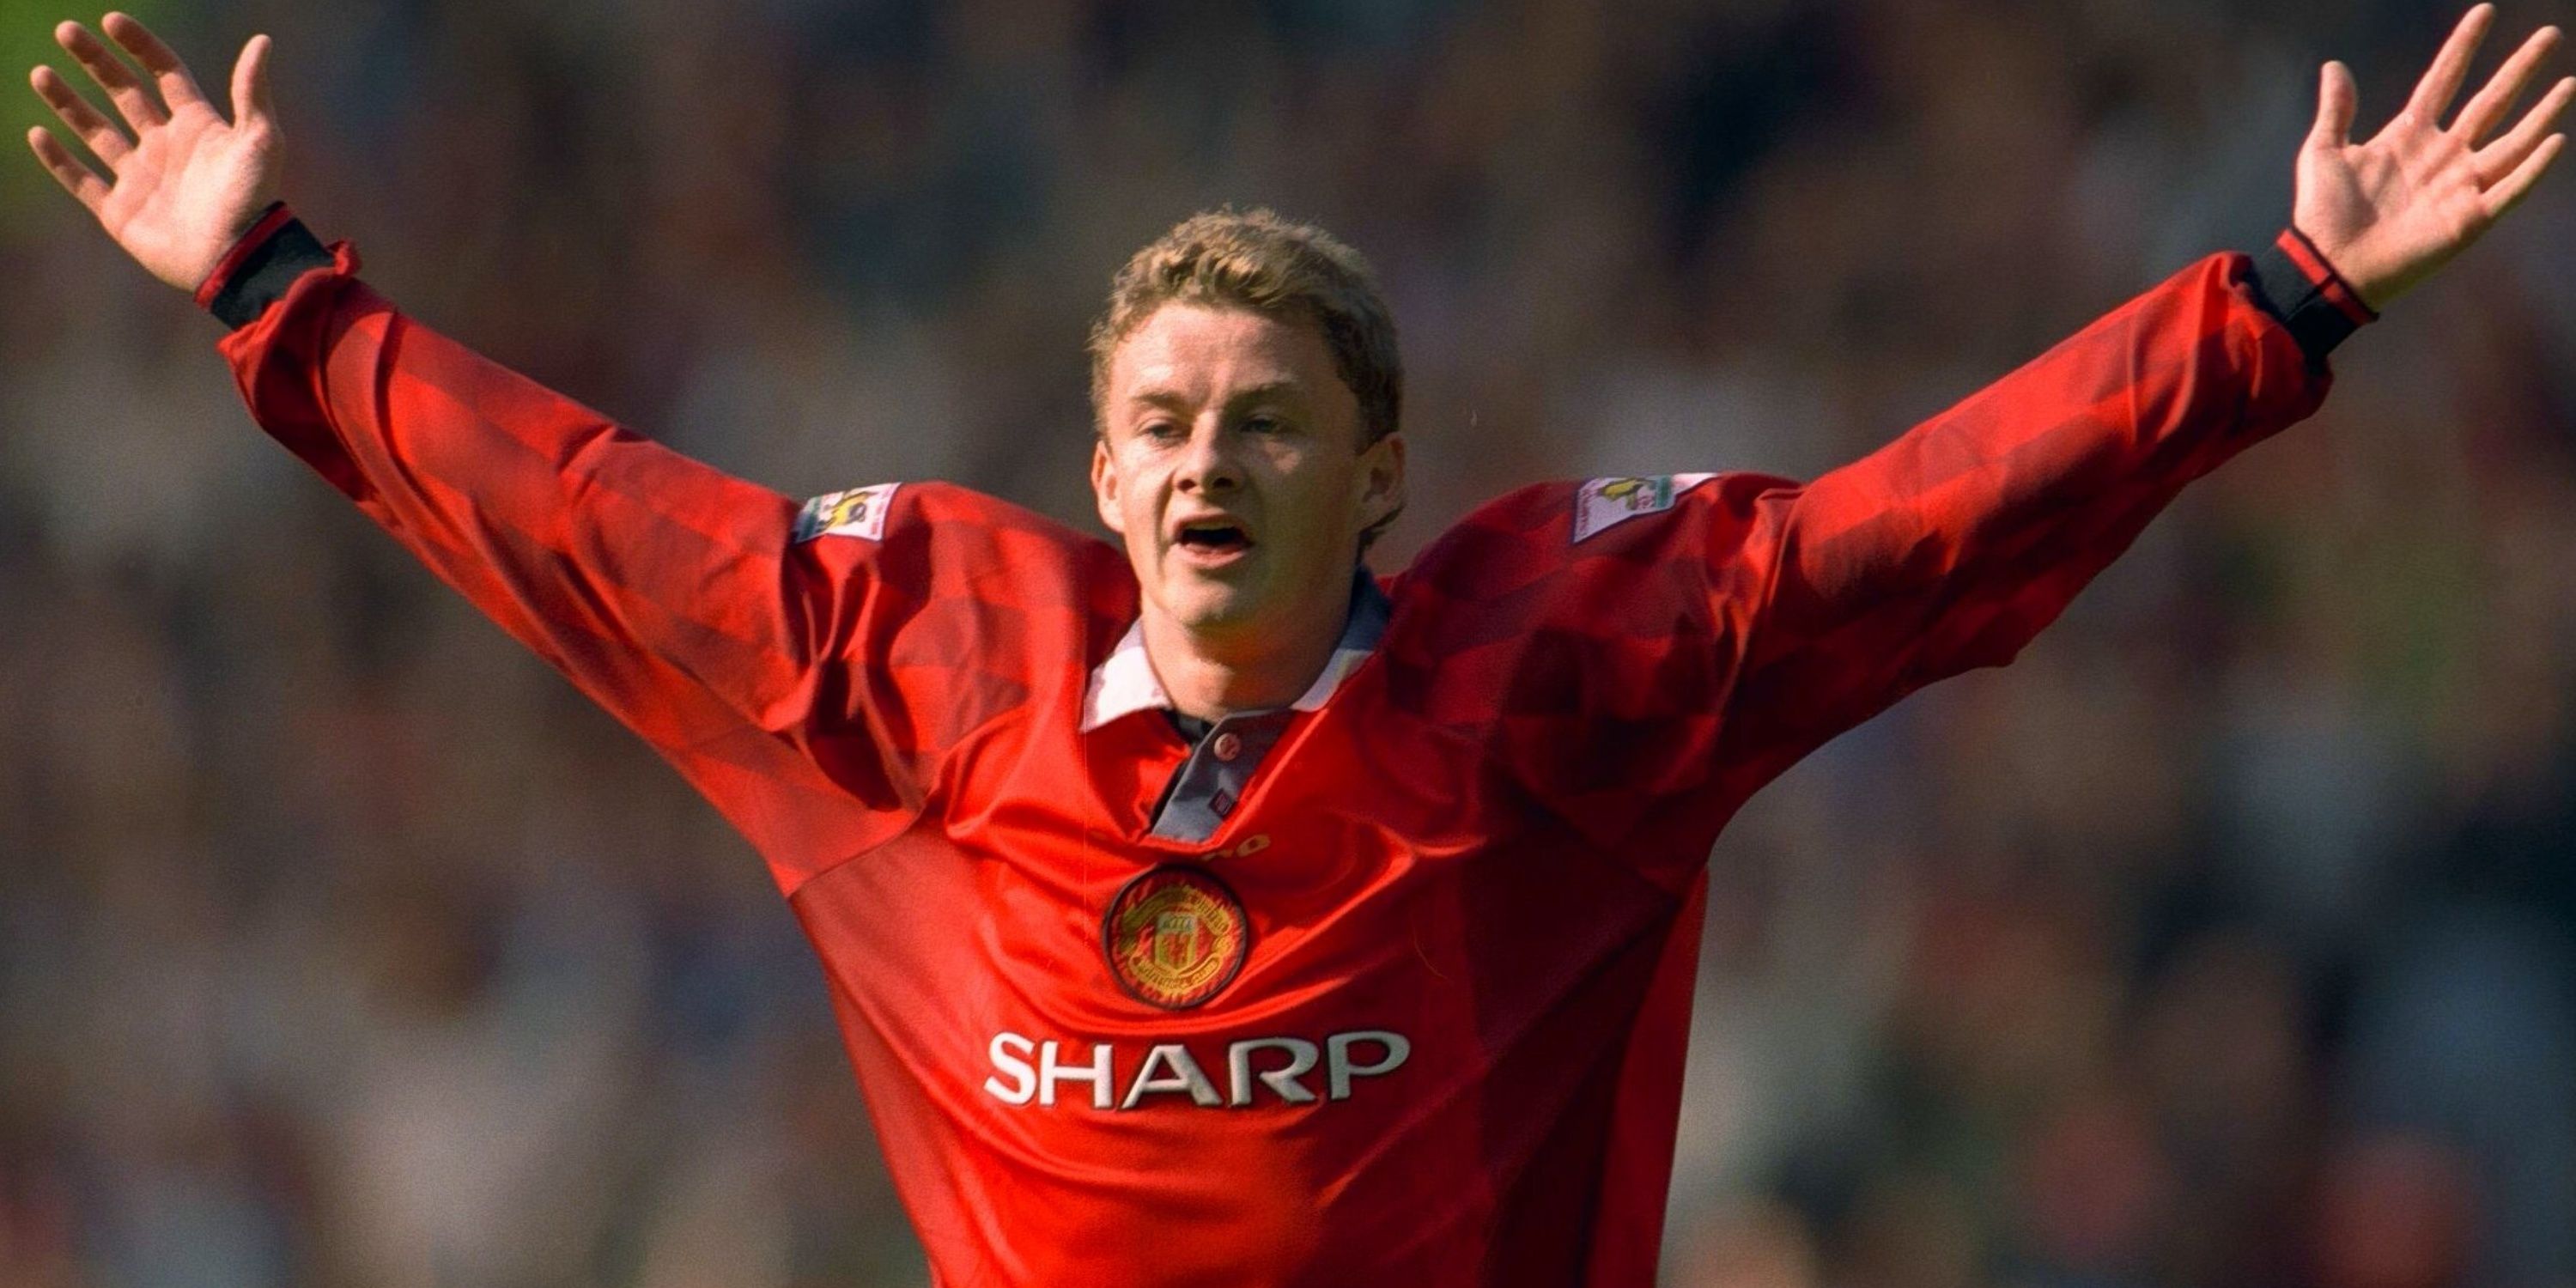 Manchester United's 25 greatest players ever (ranked)